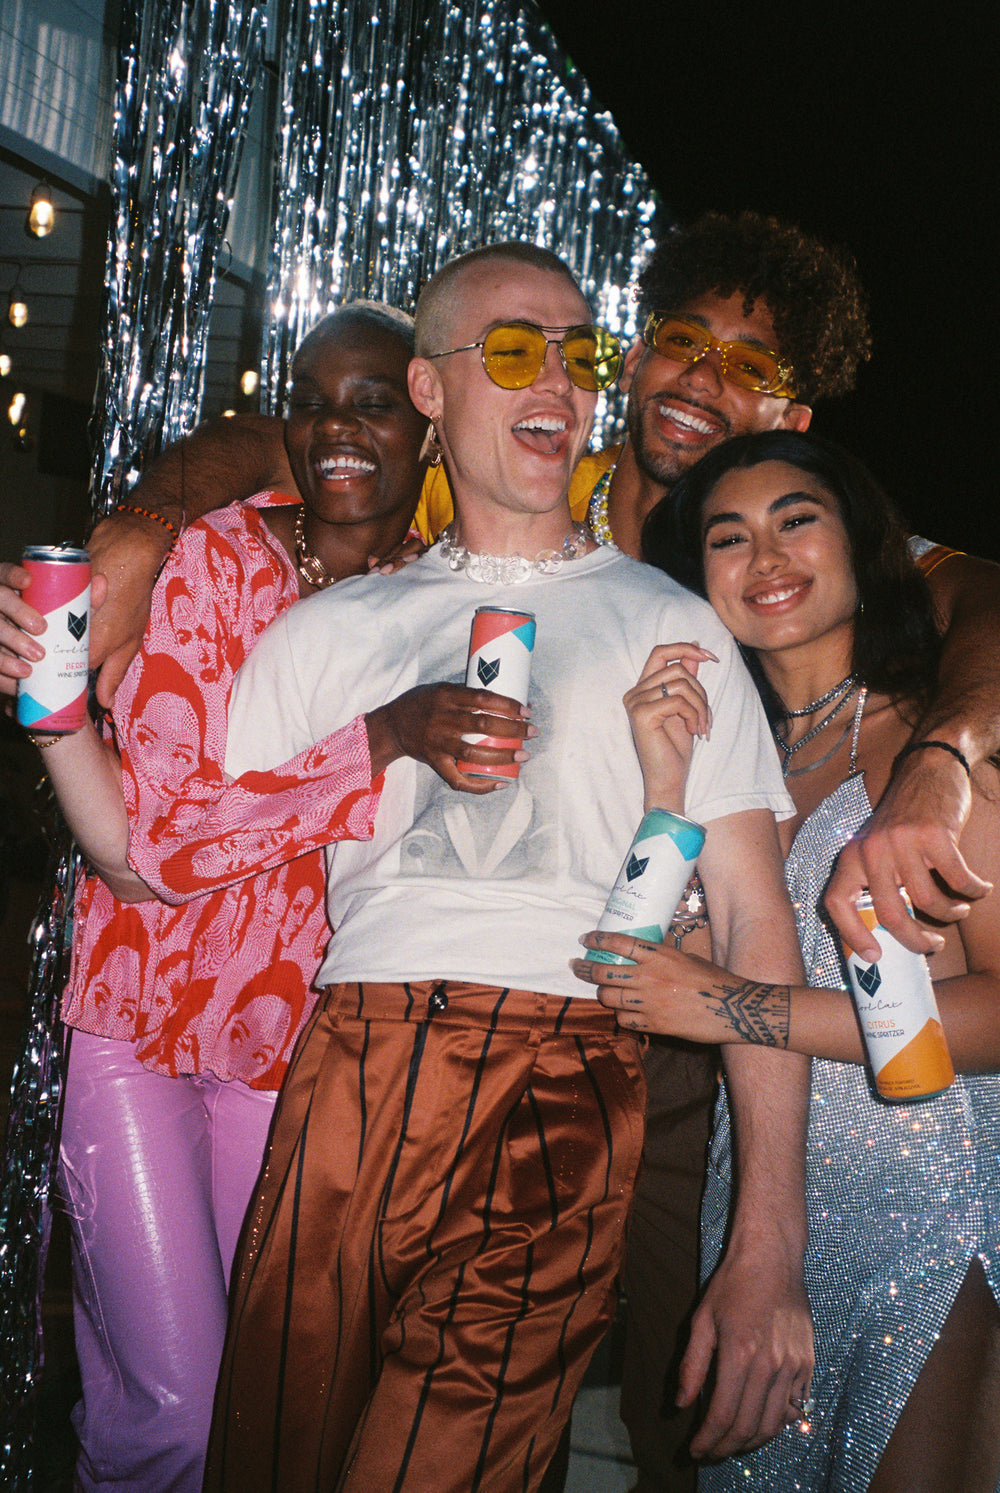 Young partygoers holding different flavors of Cool Cat canned wine spritzers.